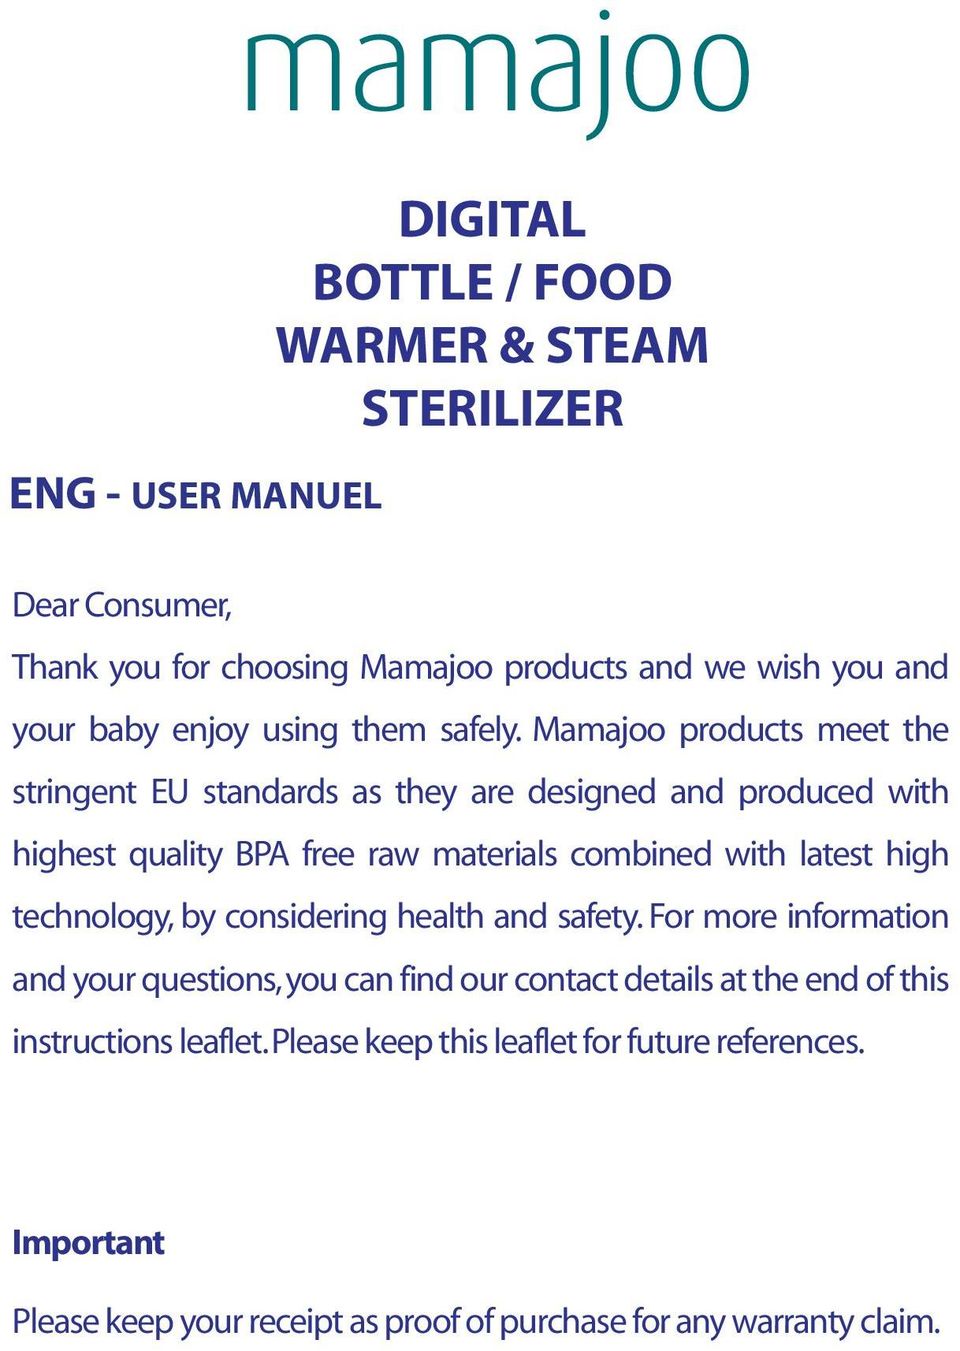 Mamajoo products meet the stringent EU standards as they are designed and produced with highest quality BPA free raw materials combined with latest high